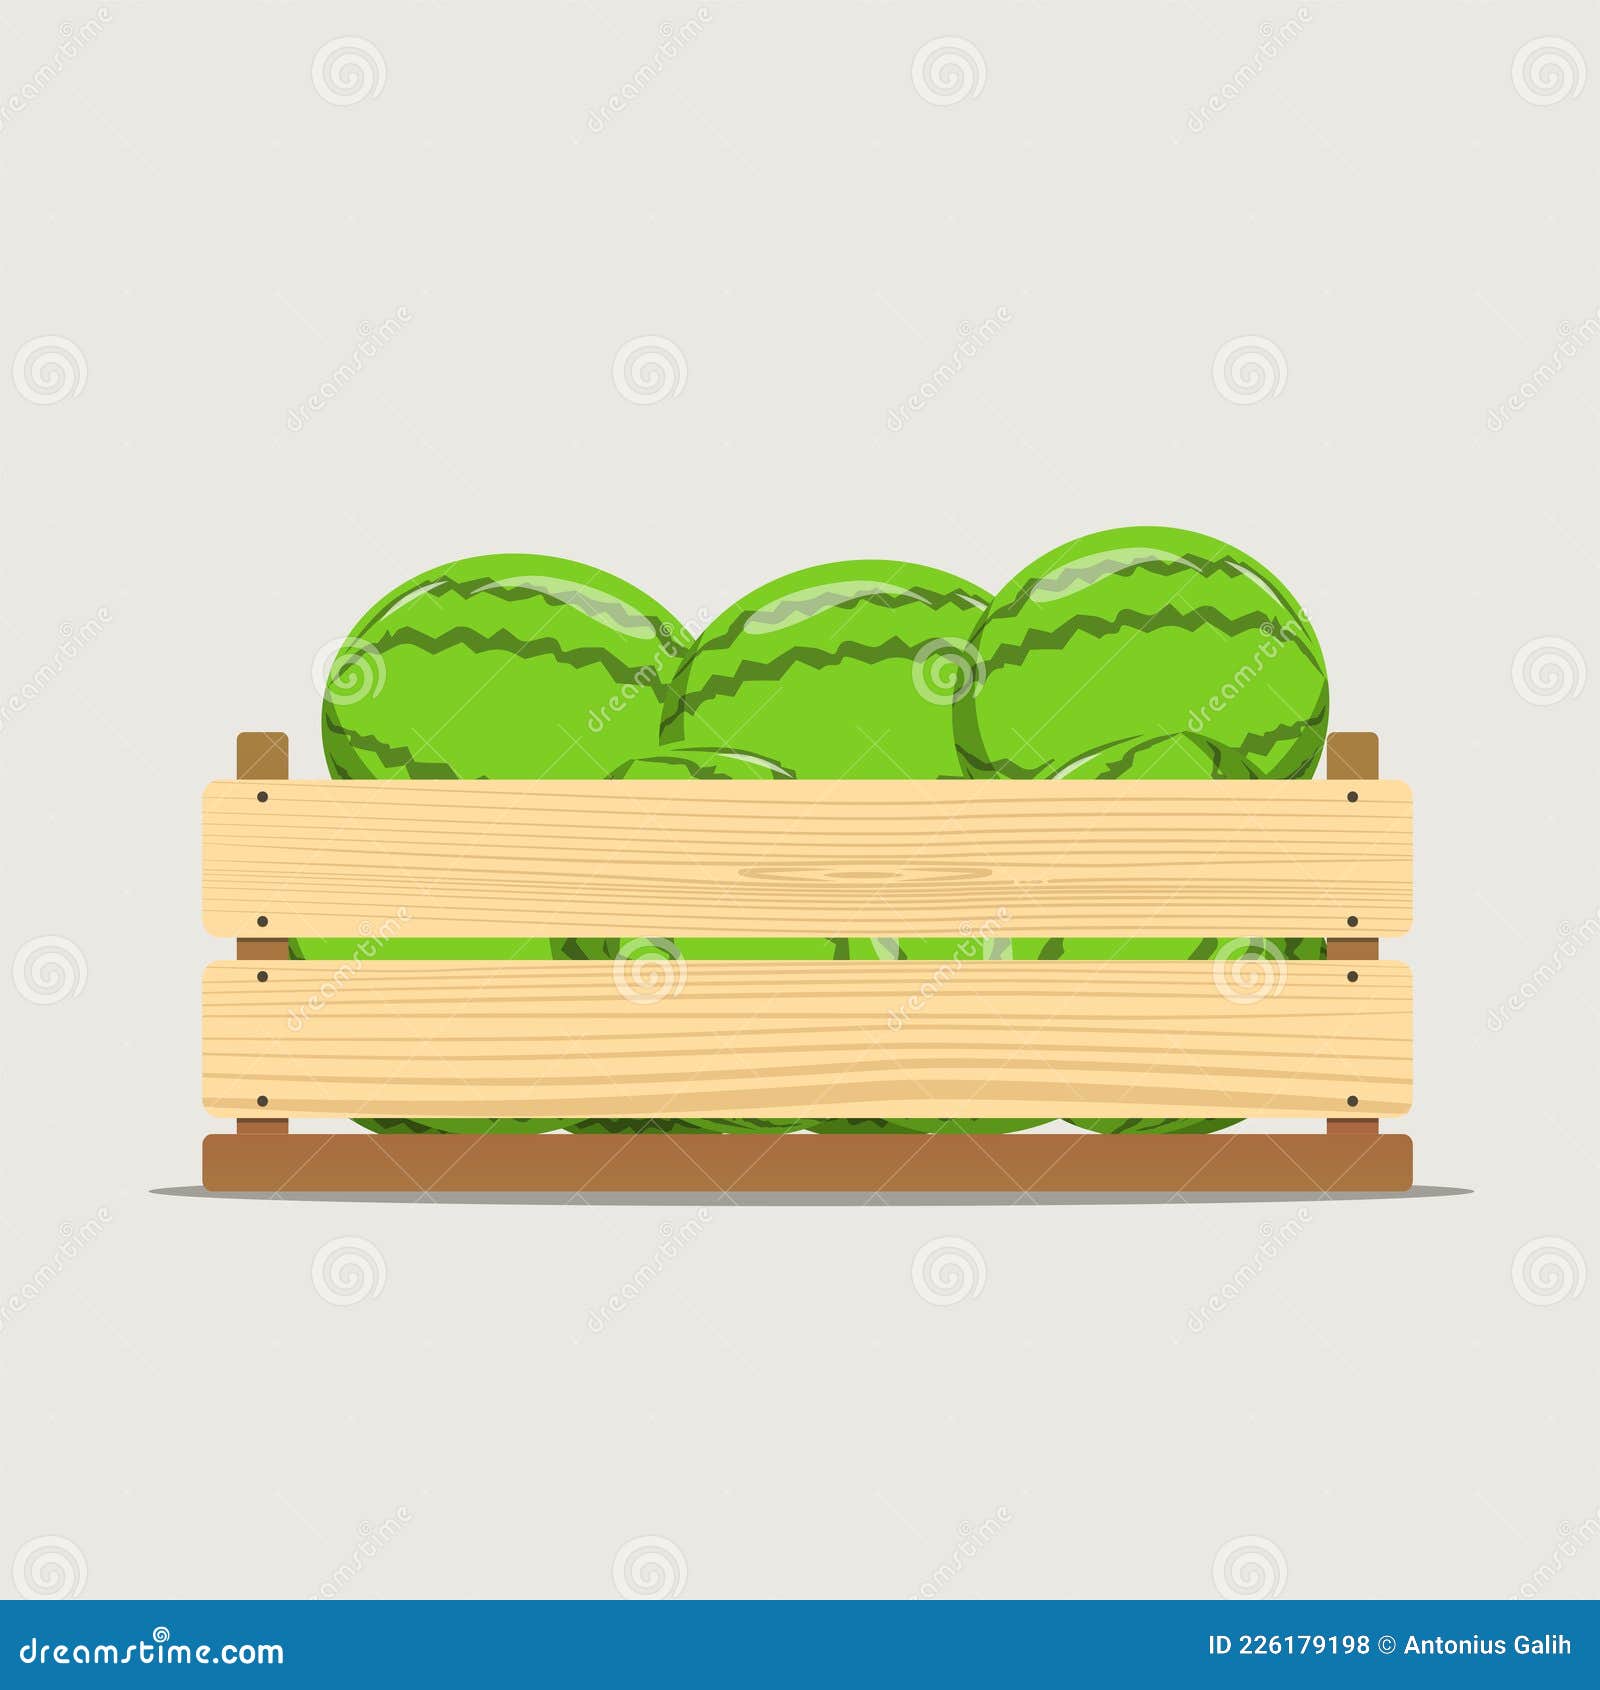 Watermelons Crate Stock Illustrations – 63 Watermelons Crate Stock